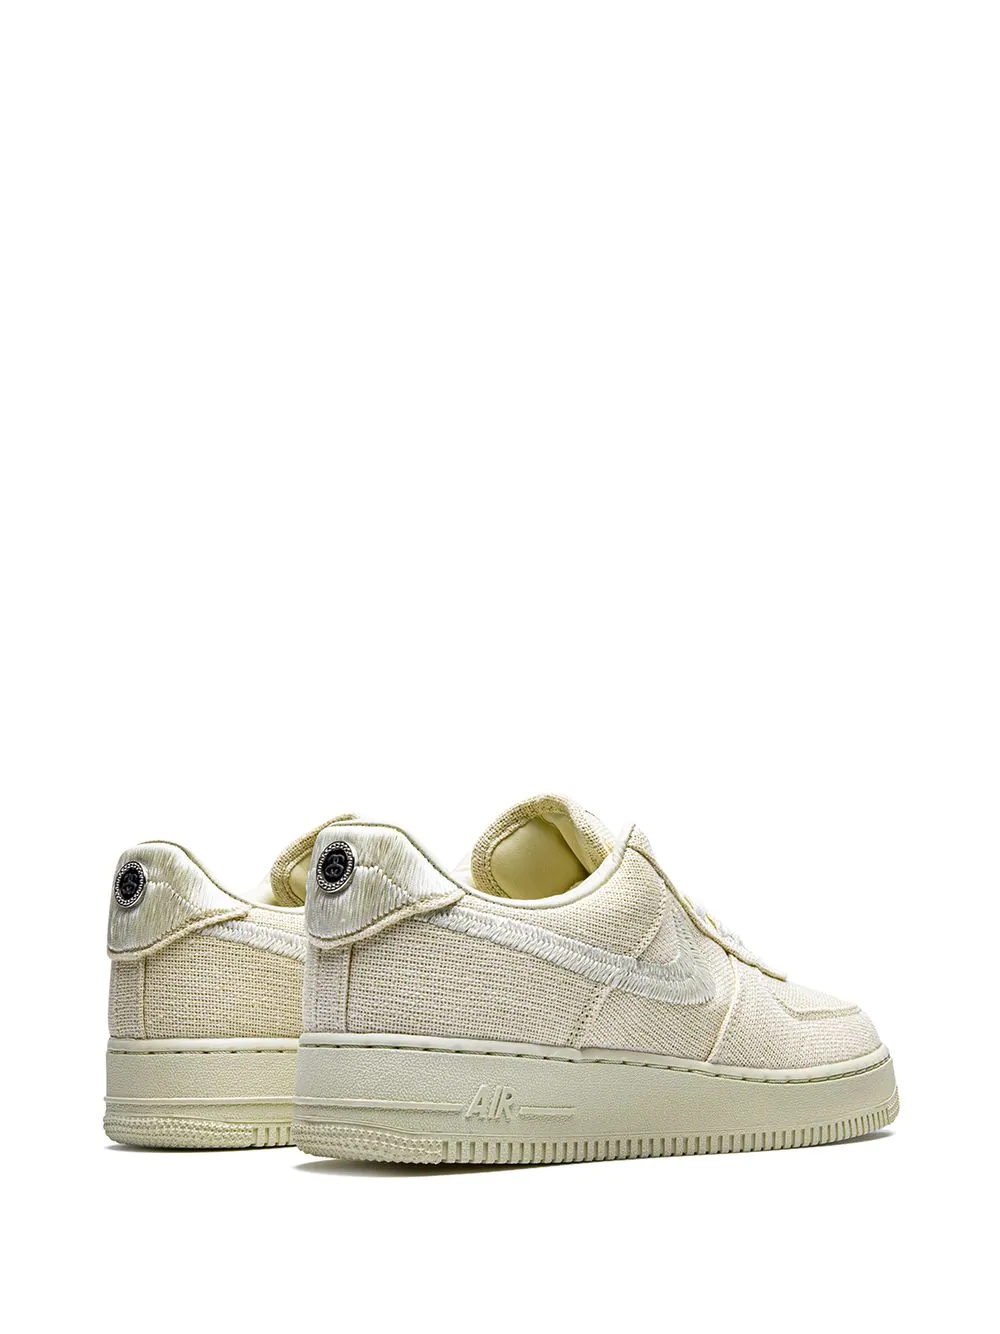 x Stussy Air Force 1 Low "Fossil" sneakers - 3